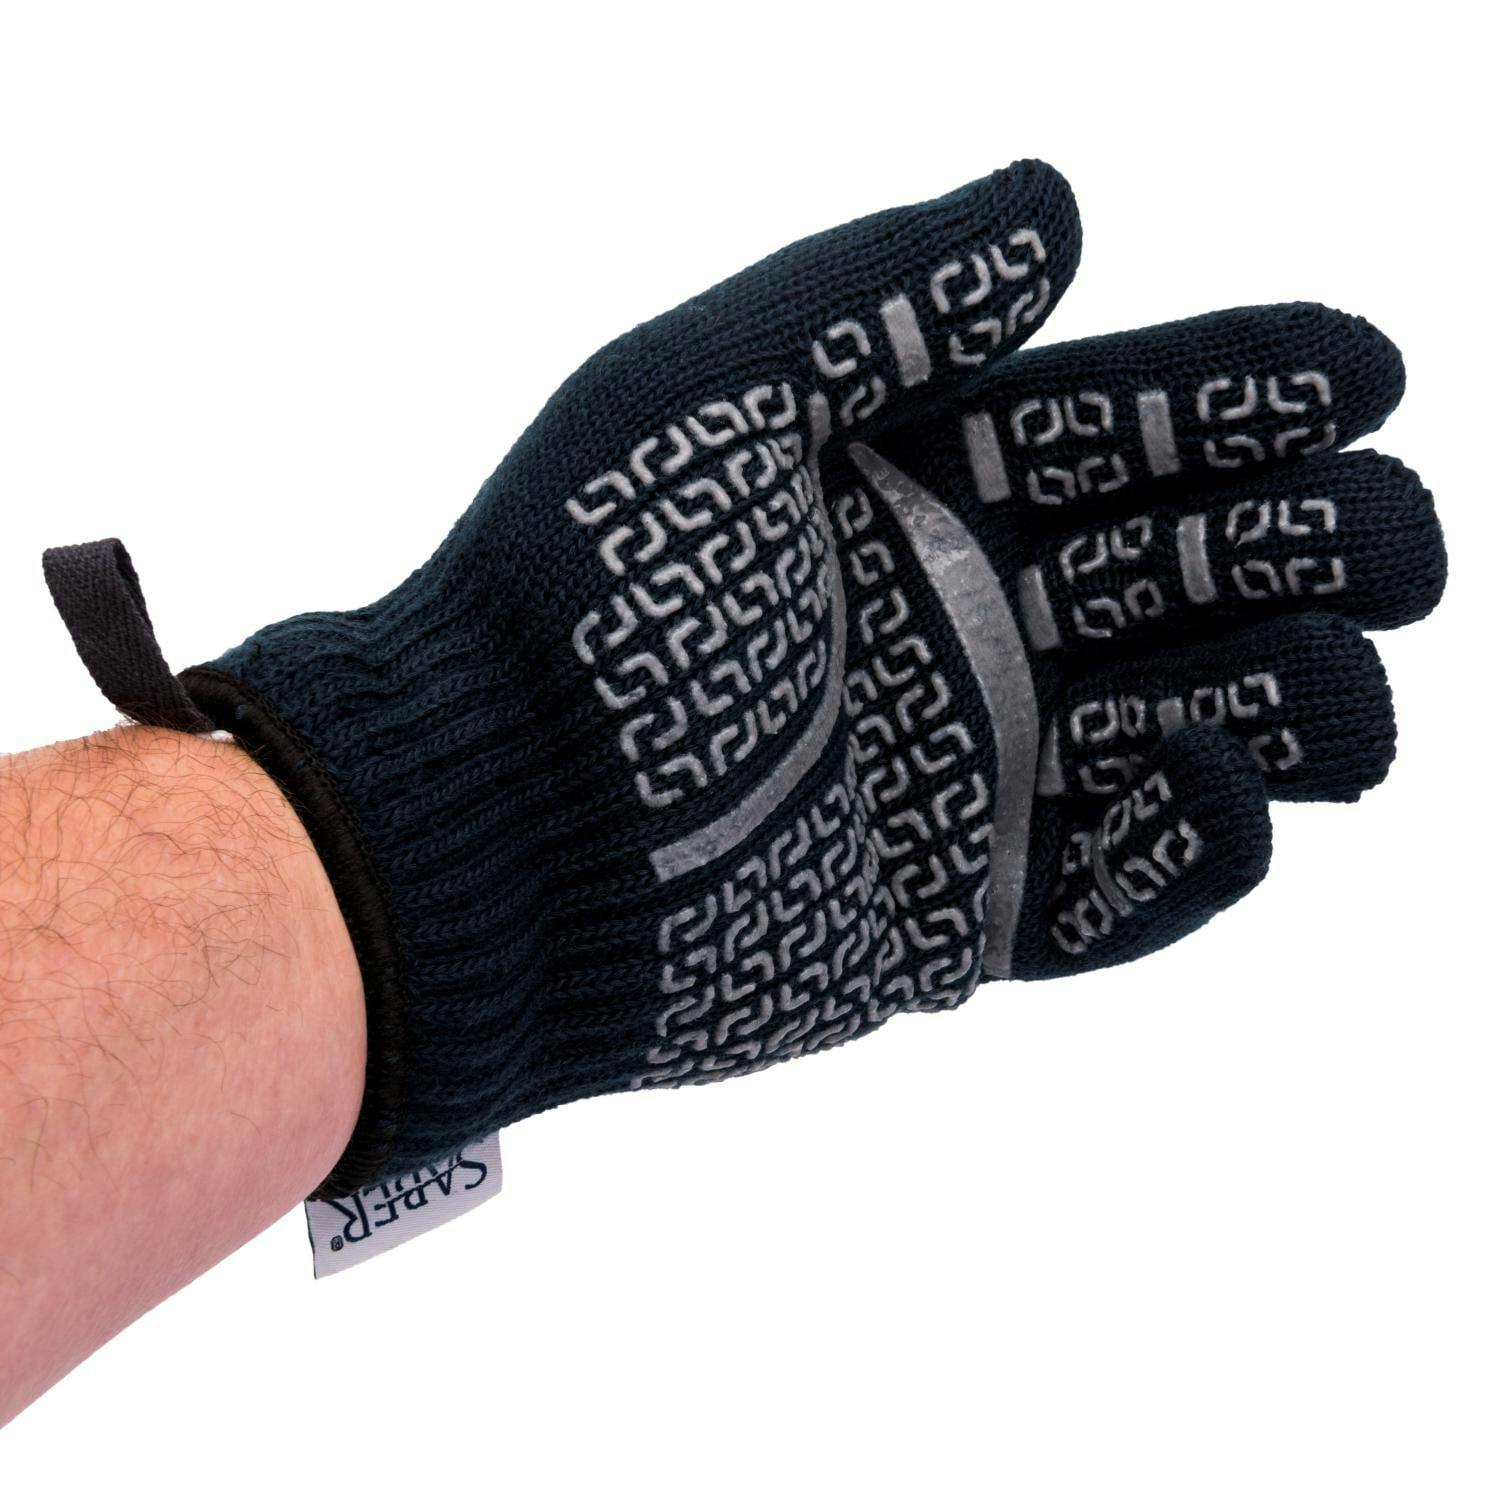 Saber High-Temperature Grill Gloves